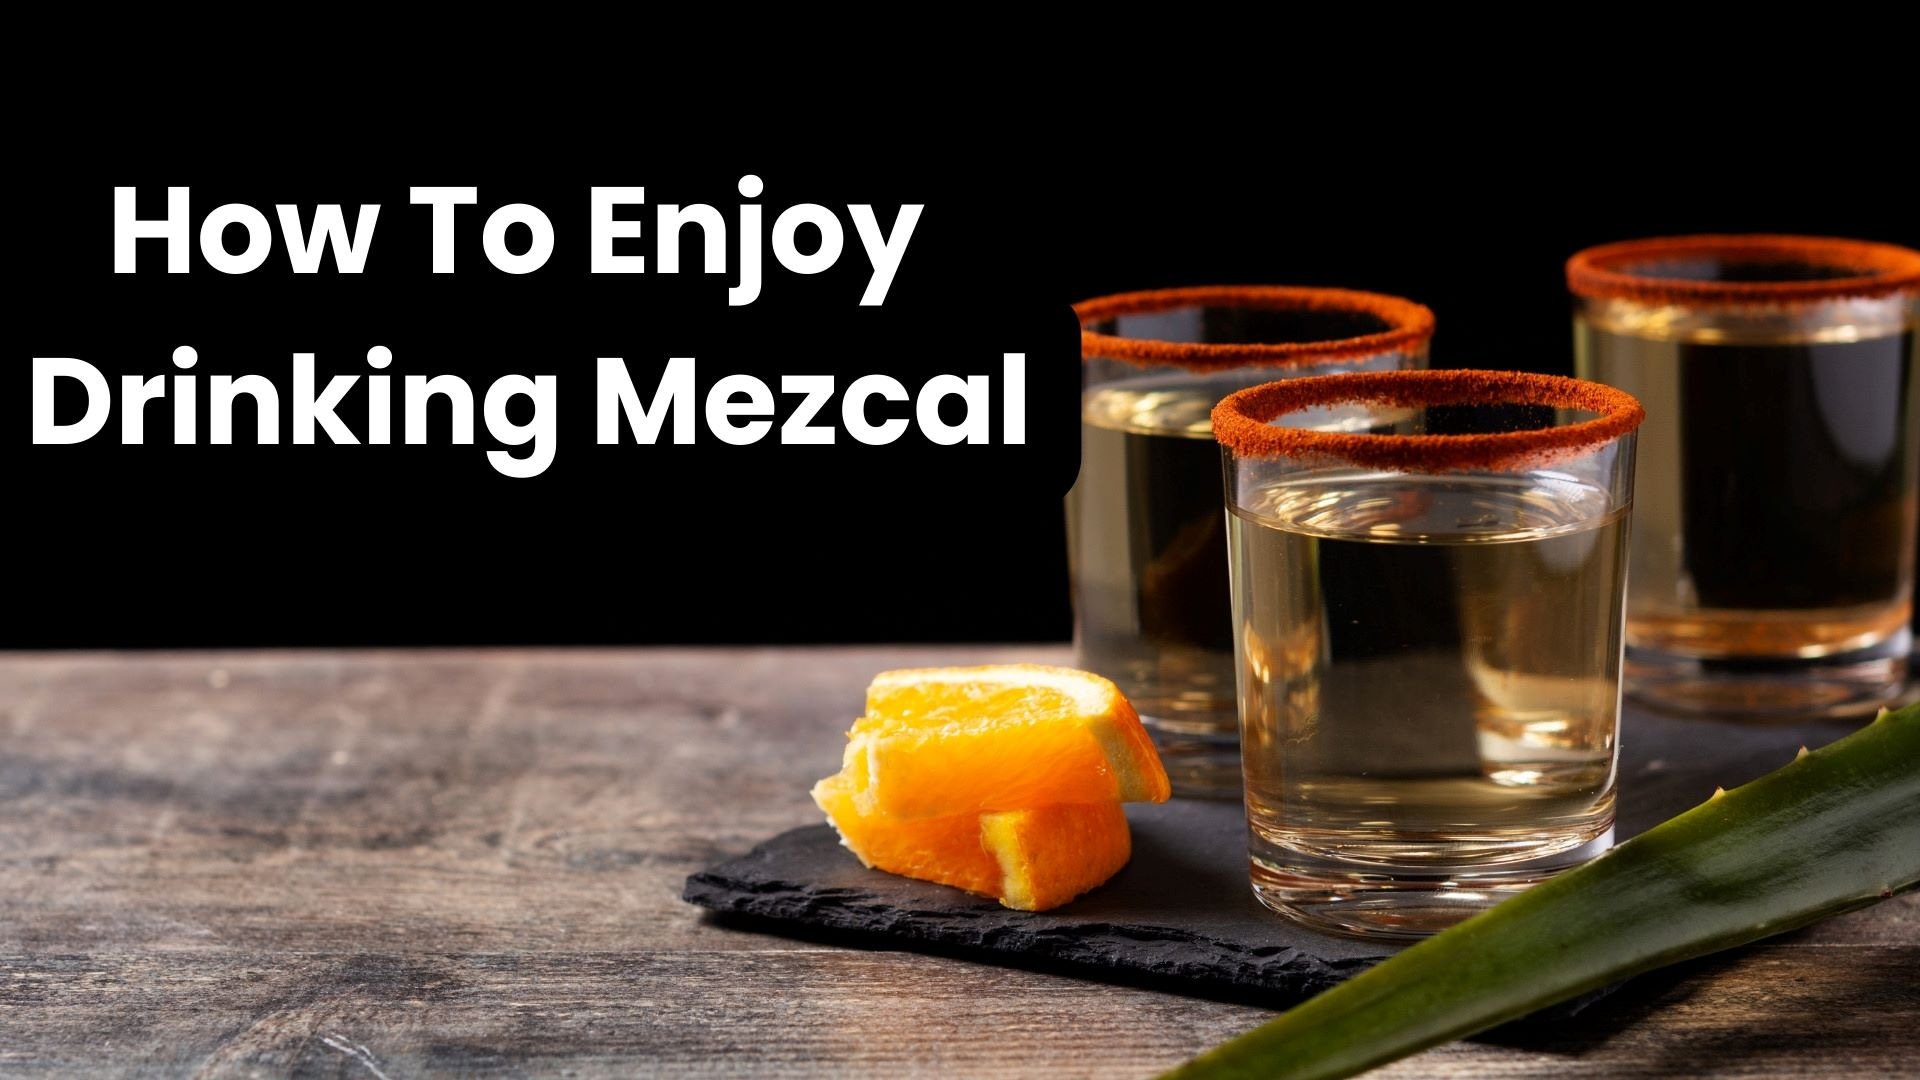 How To Enjoy Drinking Mezcal: Tips And Recommendations